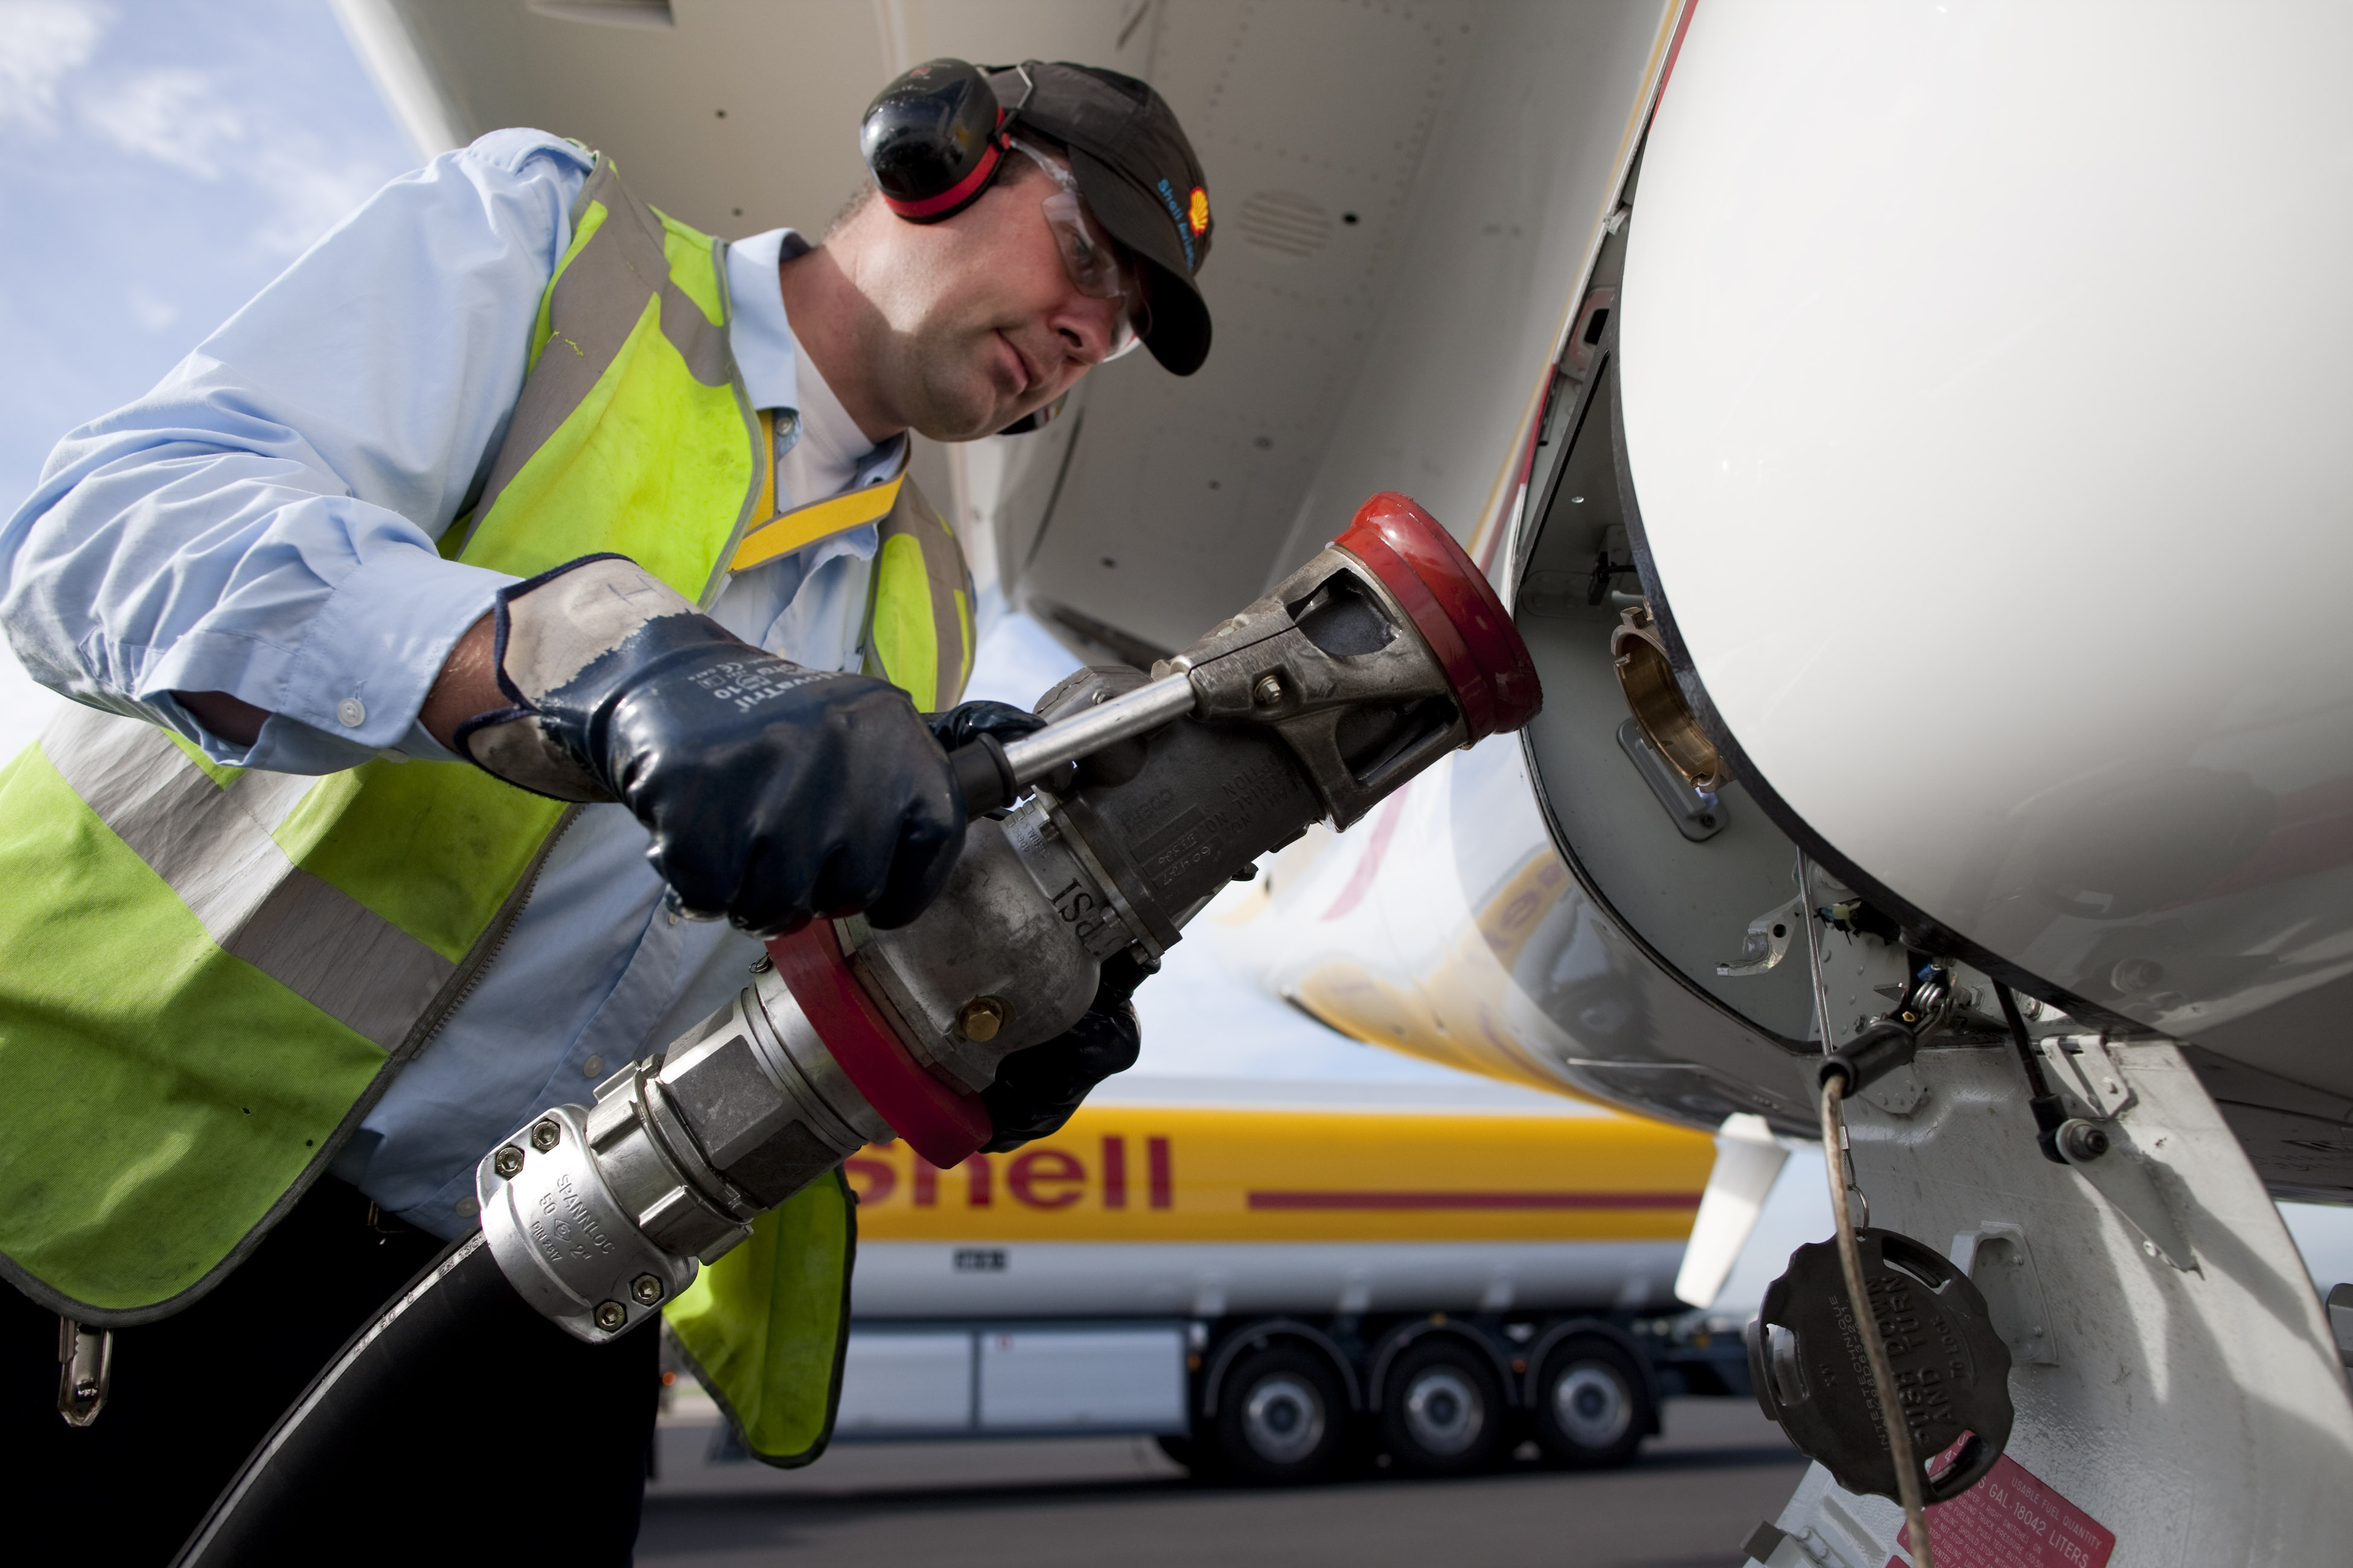 Shell In Negotiations To Market Irans Jet Fuel Financial Tribune